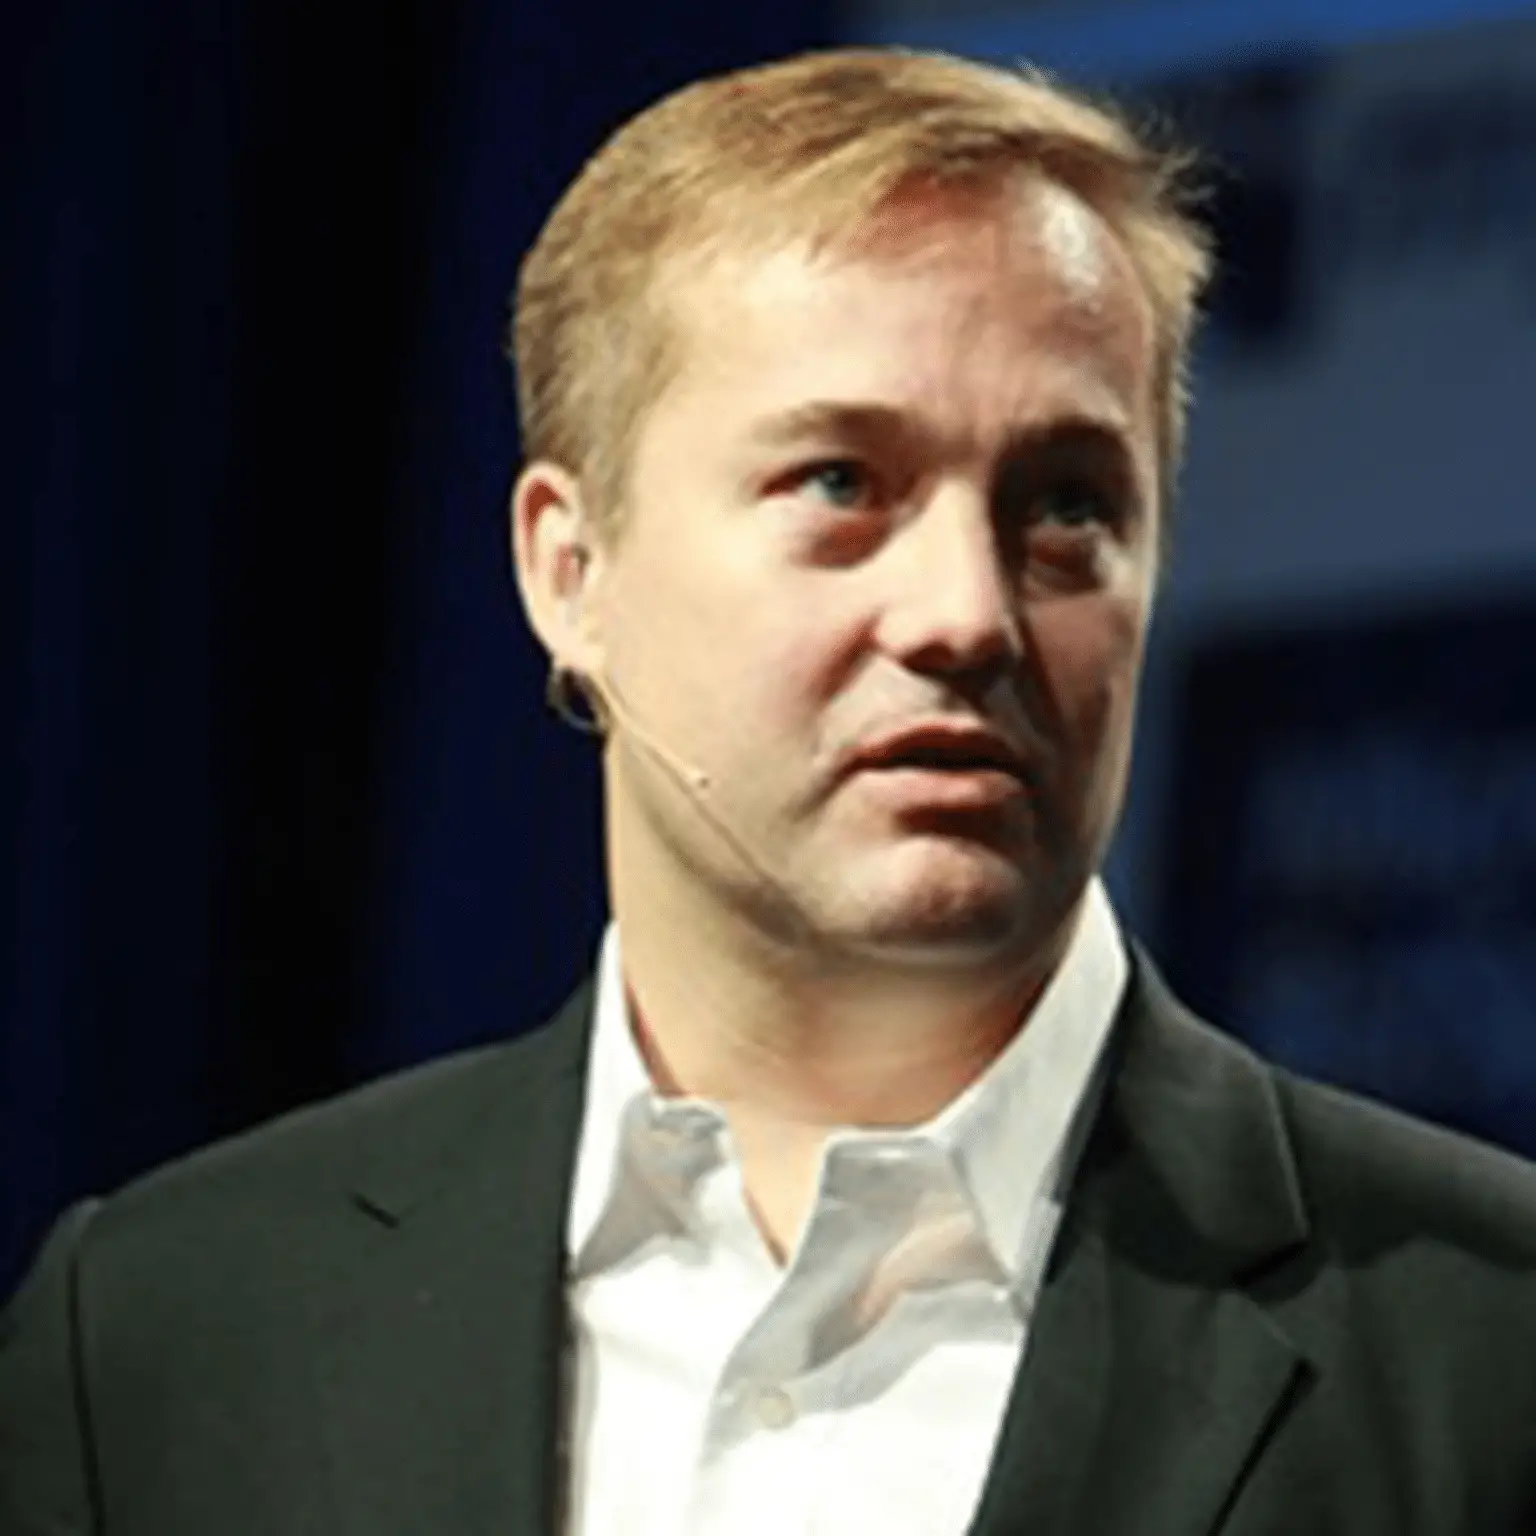 jason calacanis a case study in creating resources